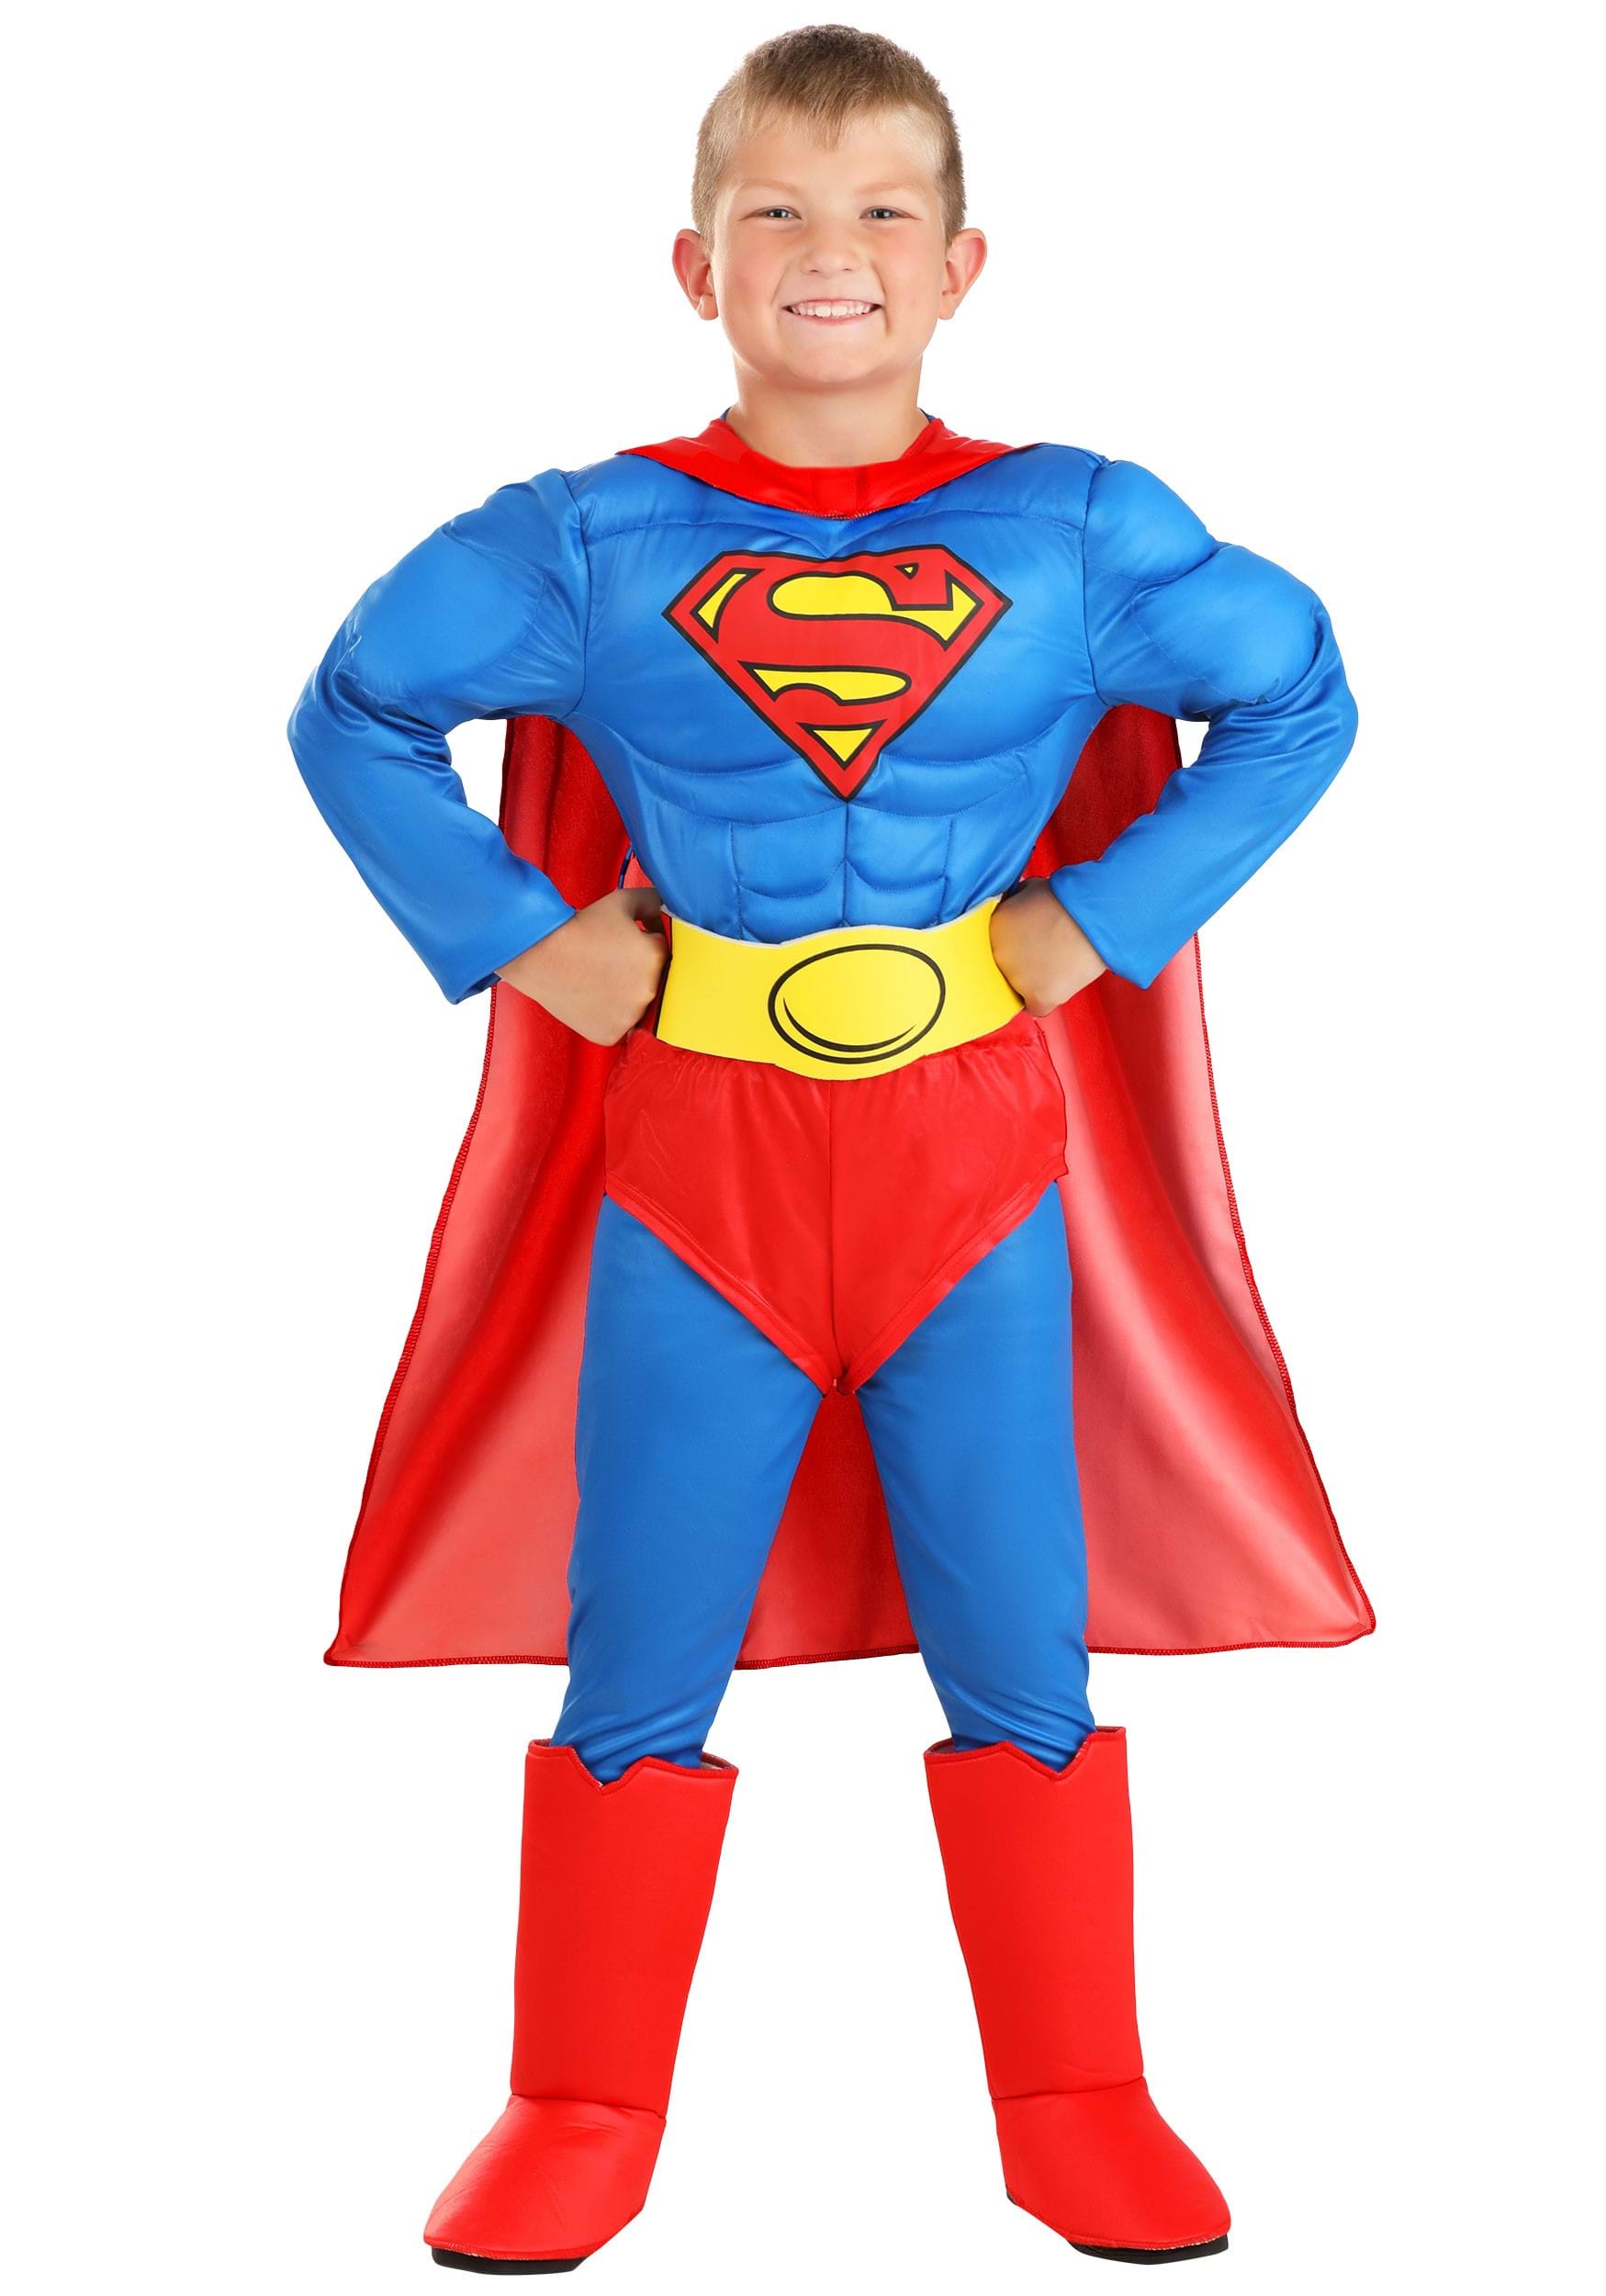 Photos - Fancy Dress Classic Jerry Leigh Kids  Superman Deluxe Costume Blue/Red/Yellow J 